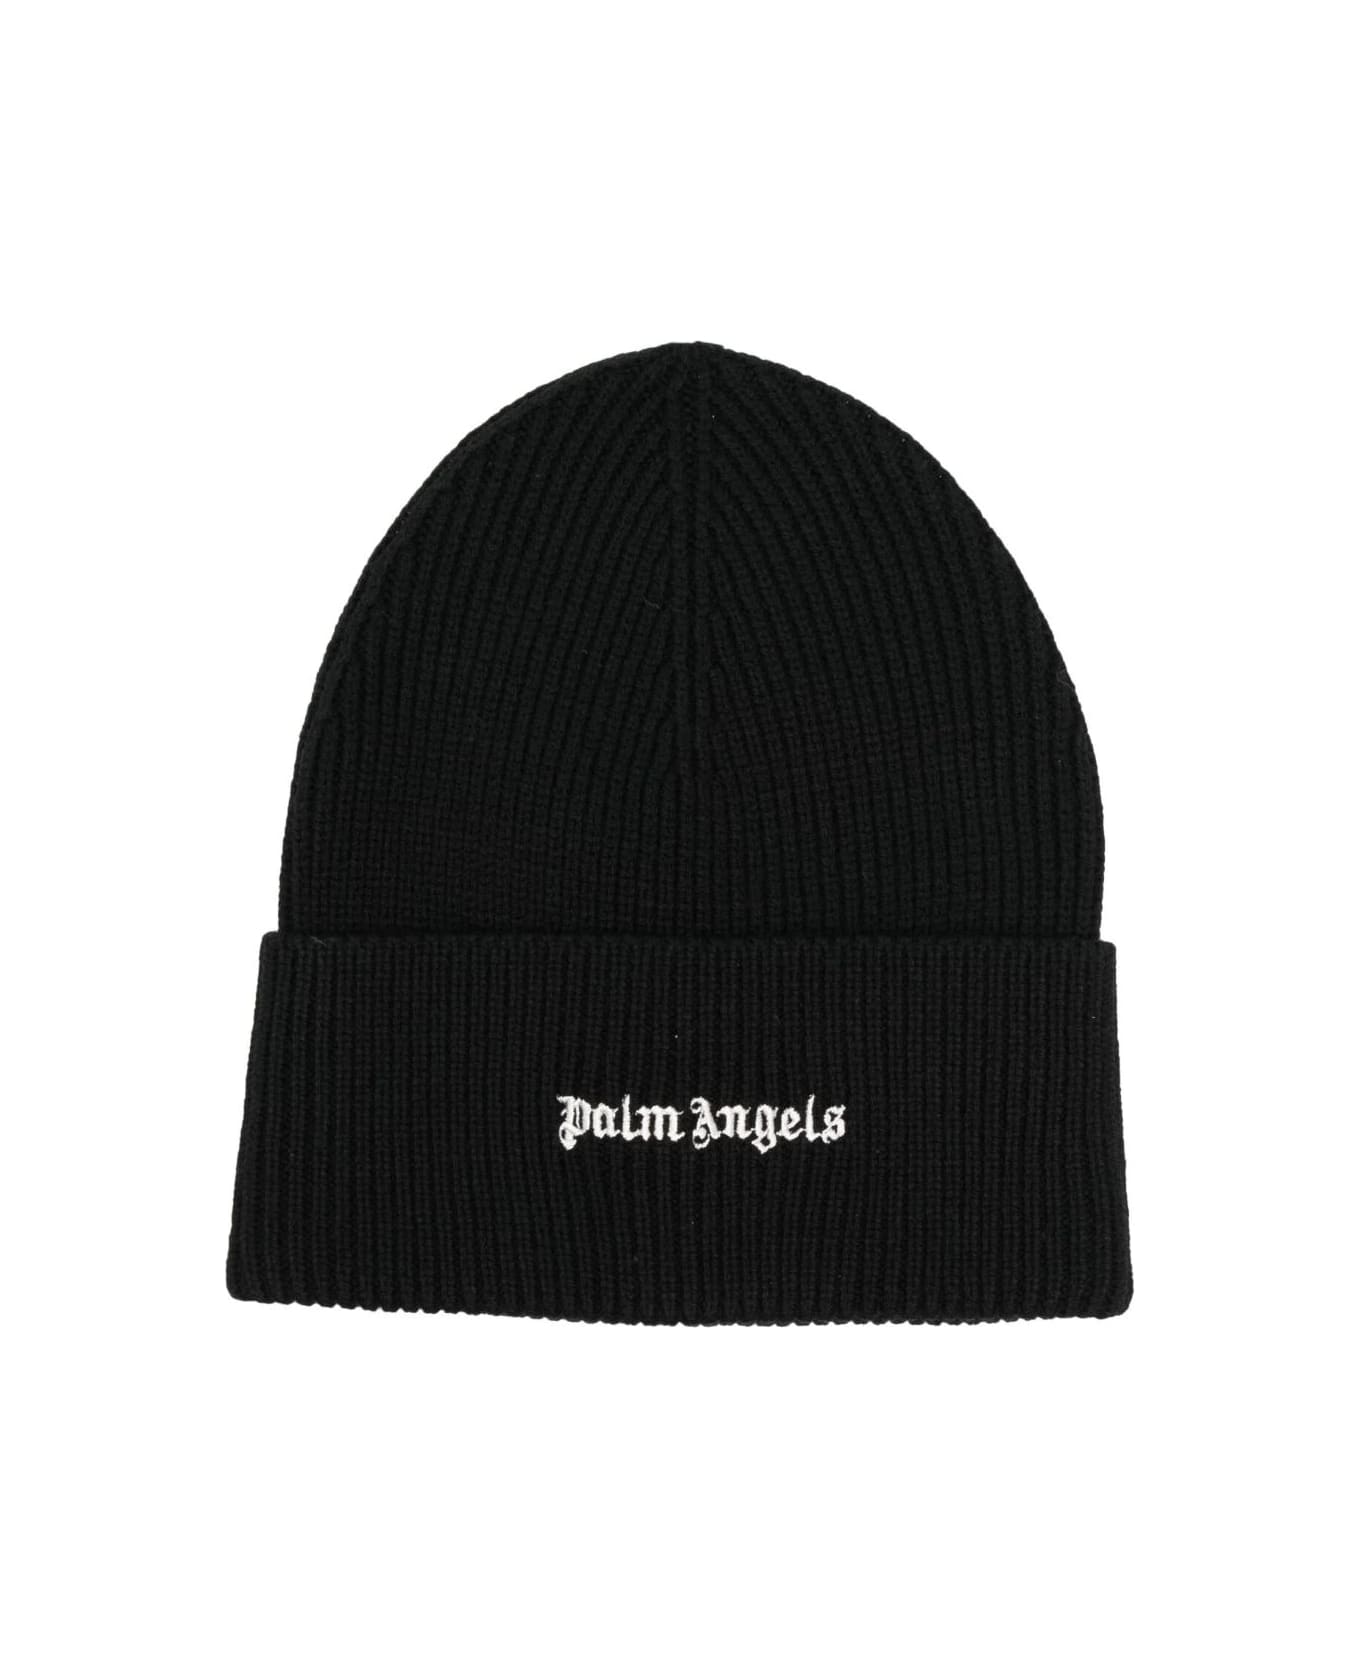 Palm Angels Black Ribbed Hat With Logo - Black